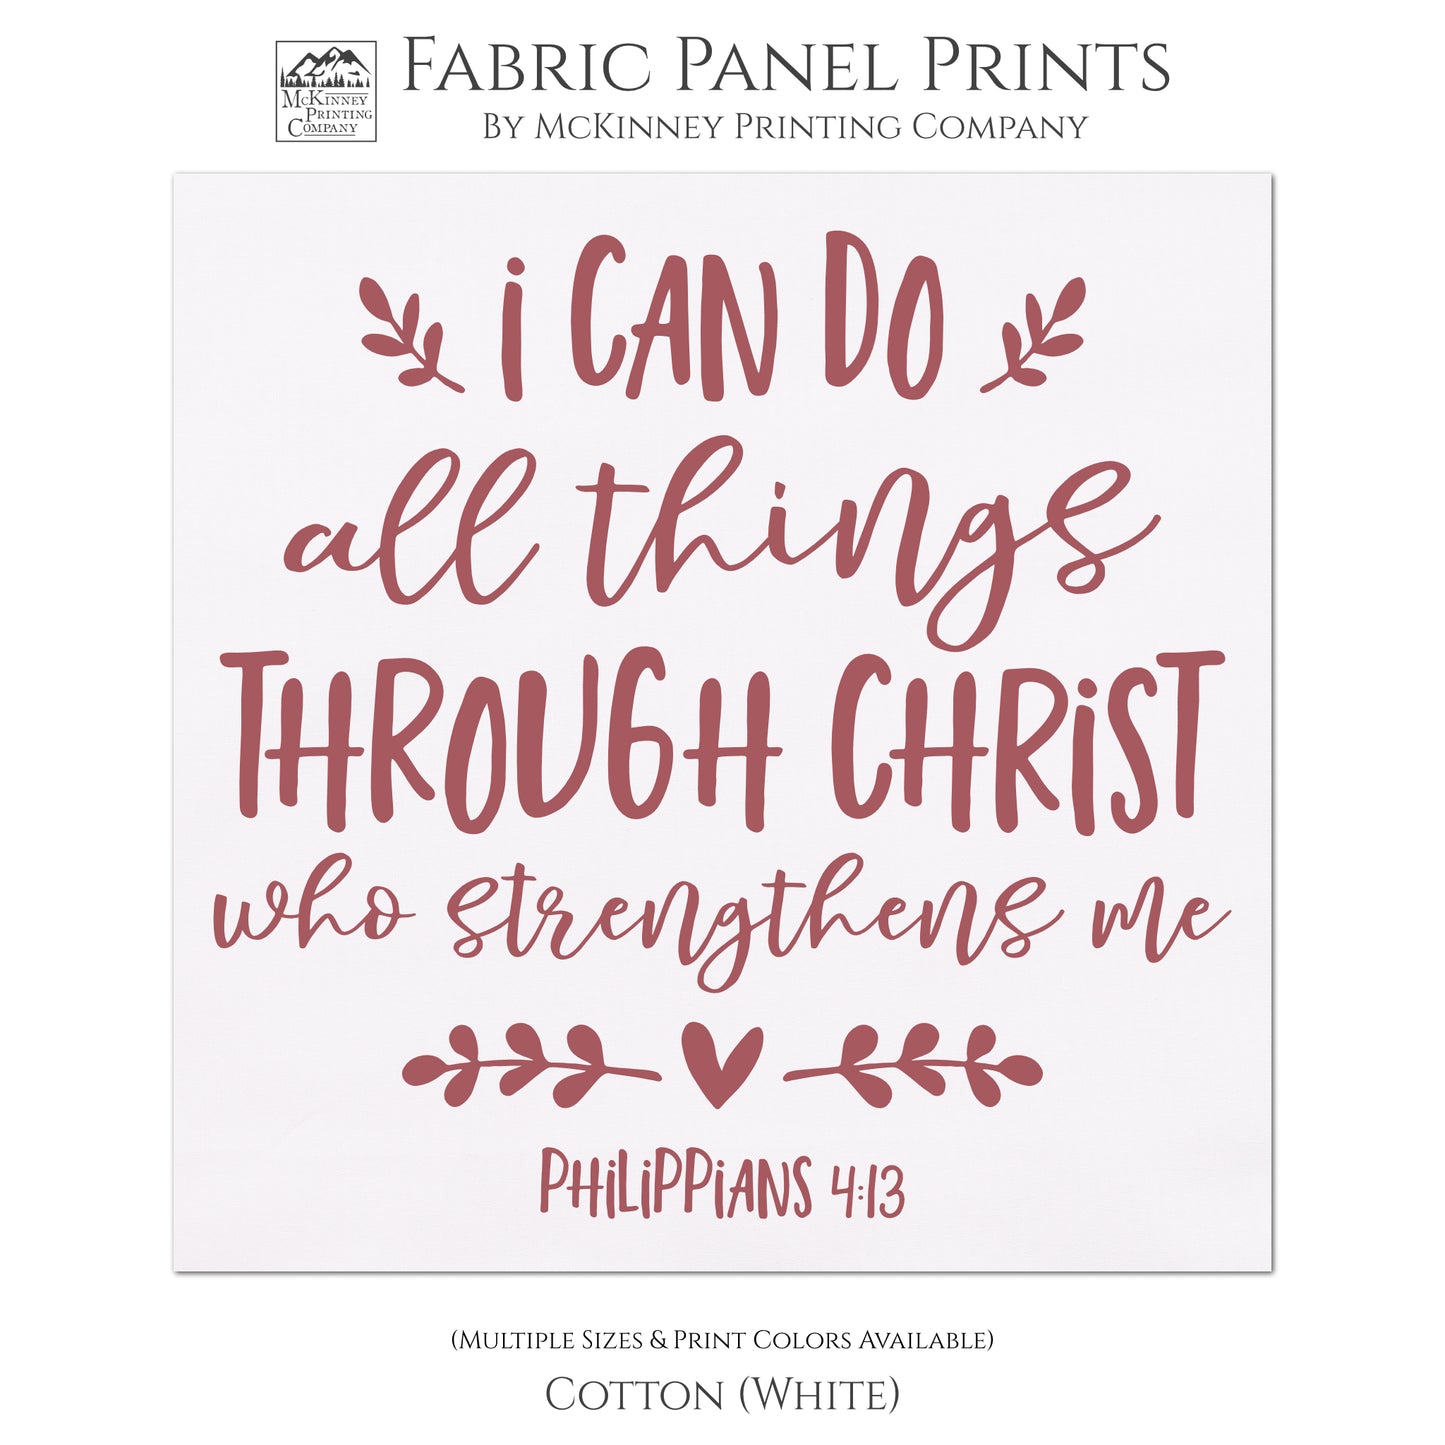 Philippians 4:13 - I can do all things through Christ who strengthens me. Quilt Block, Fabric Panel Print - Cotton, White